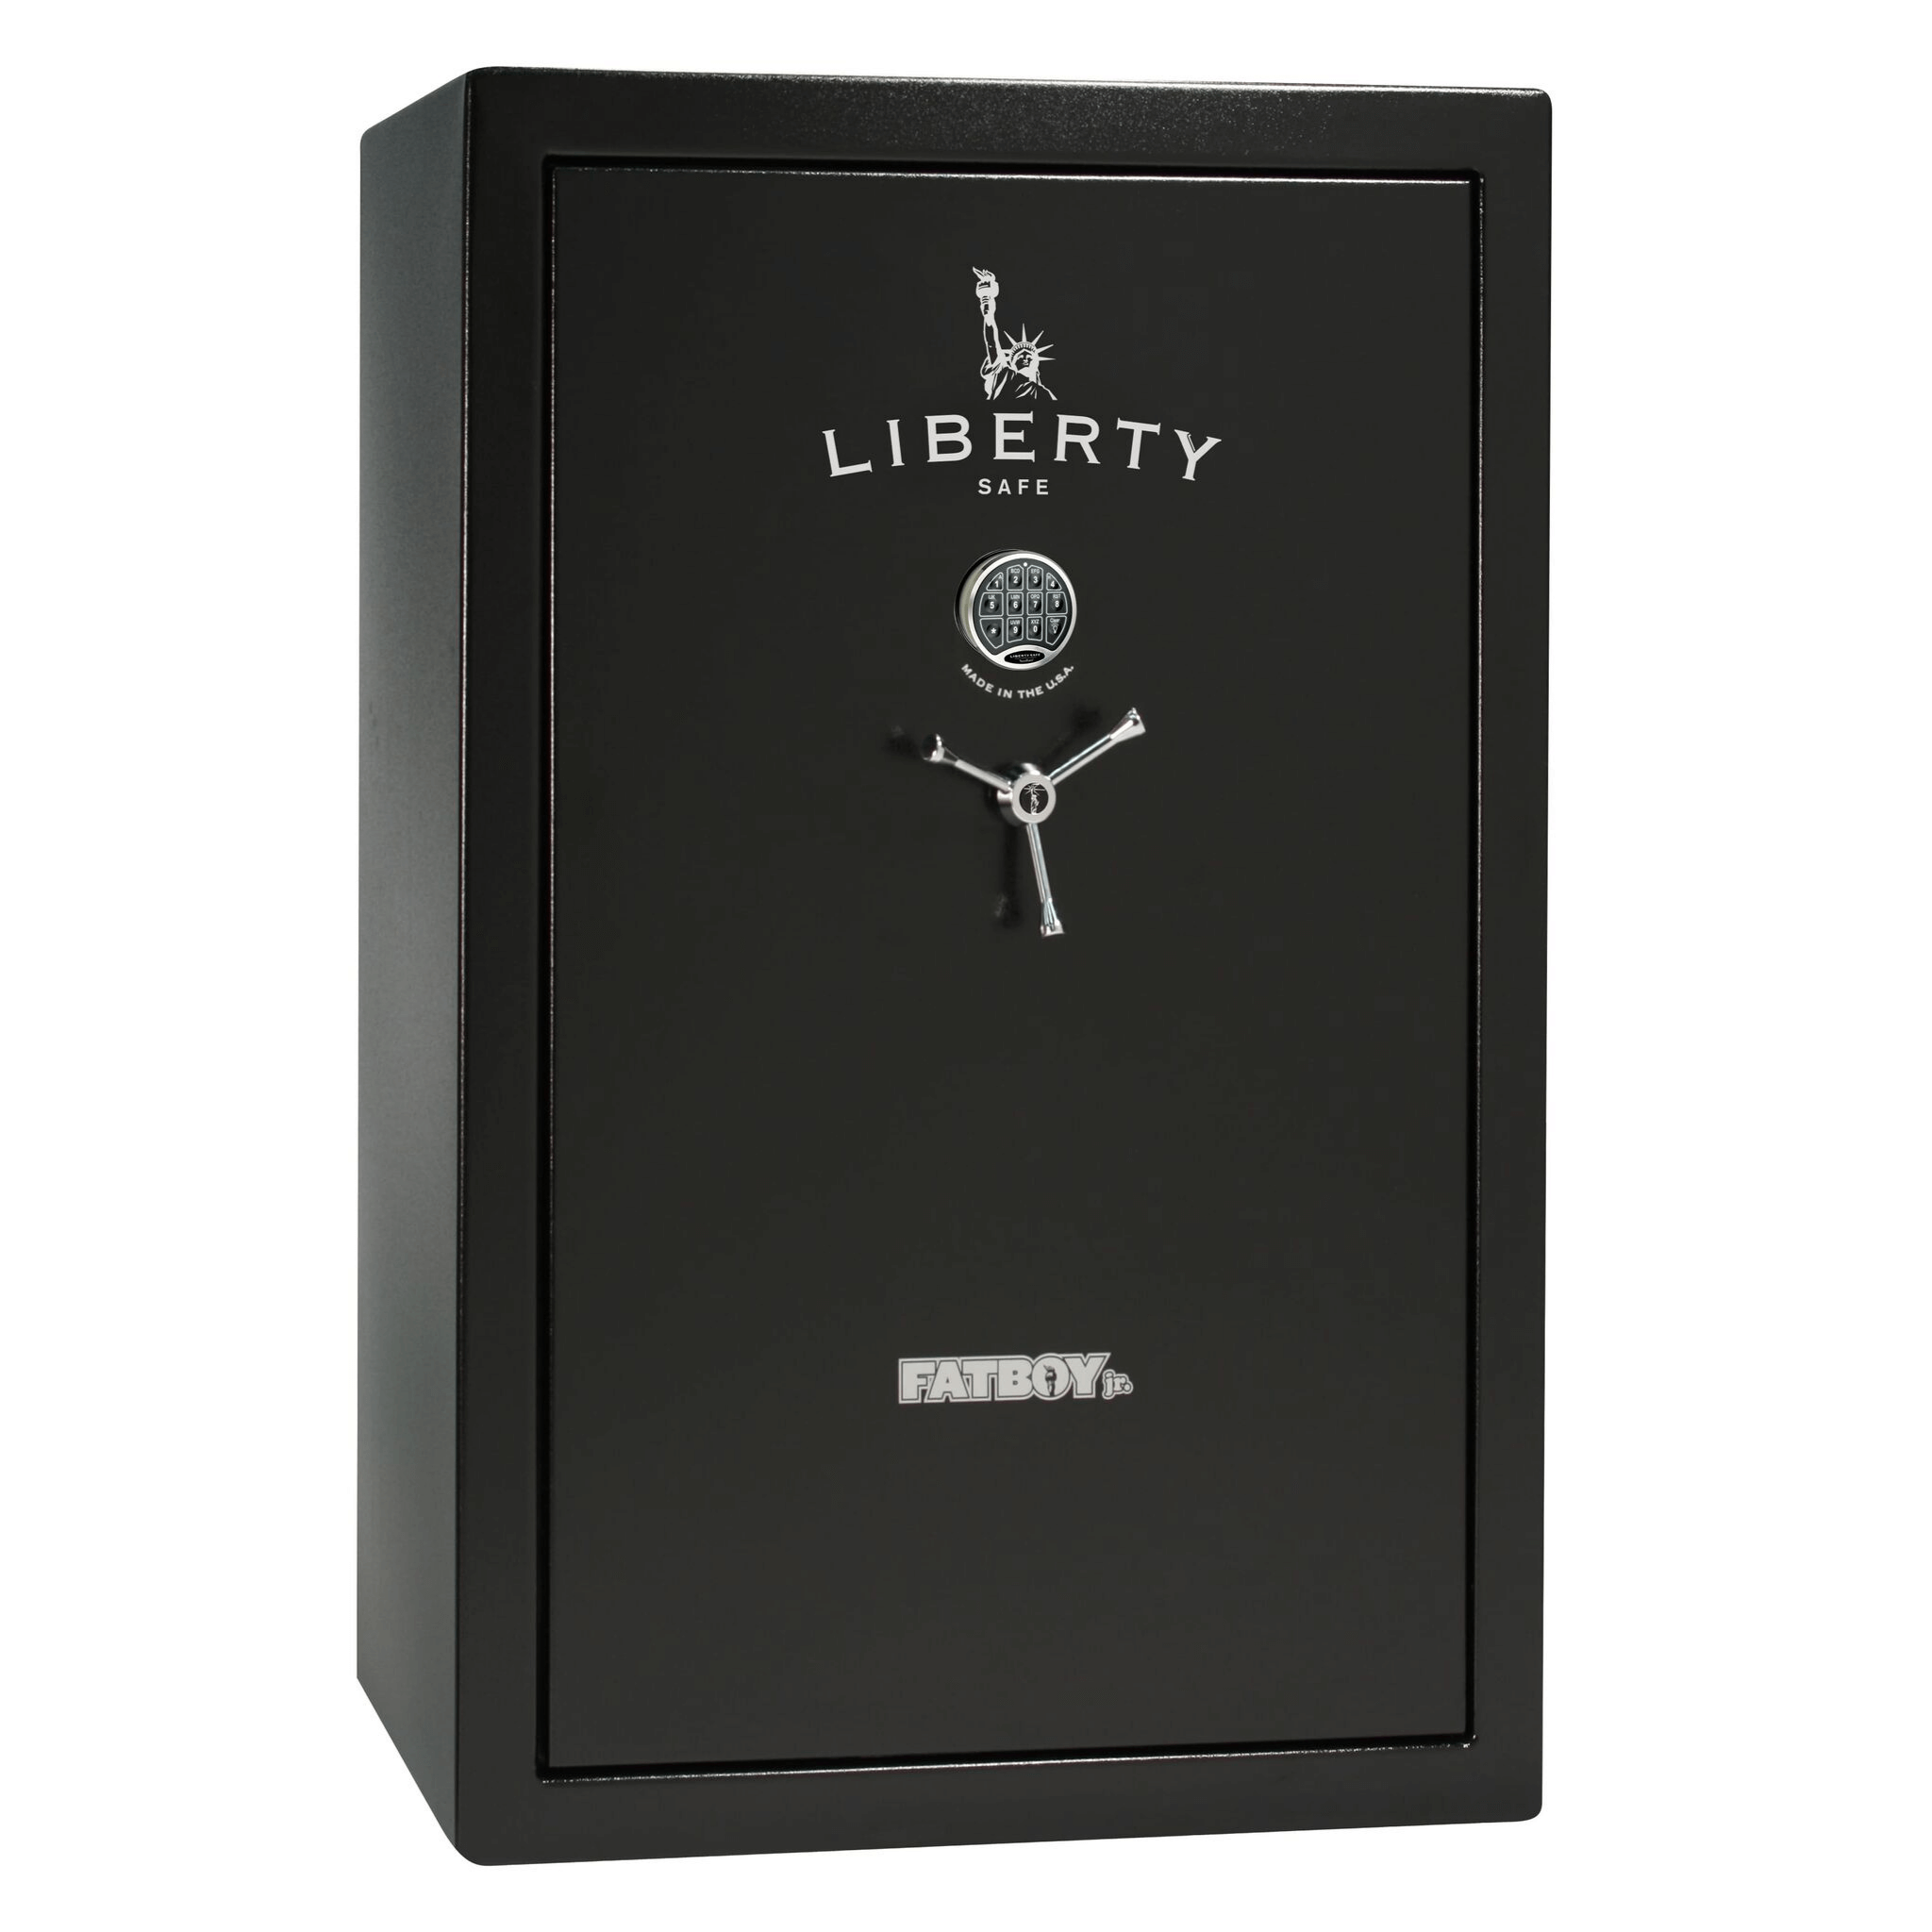 Fatboy Jr. Series | Level 3 Security | 75 Minute Fire Protection | 48 | Dimensions: 60.5"(H) x 42"(W) x 25"(D) | Black Textured | Electronic Lock